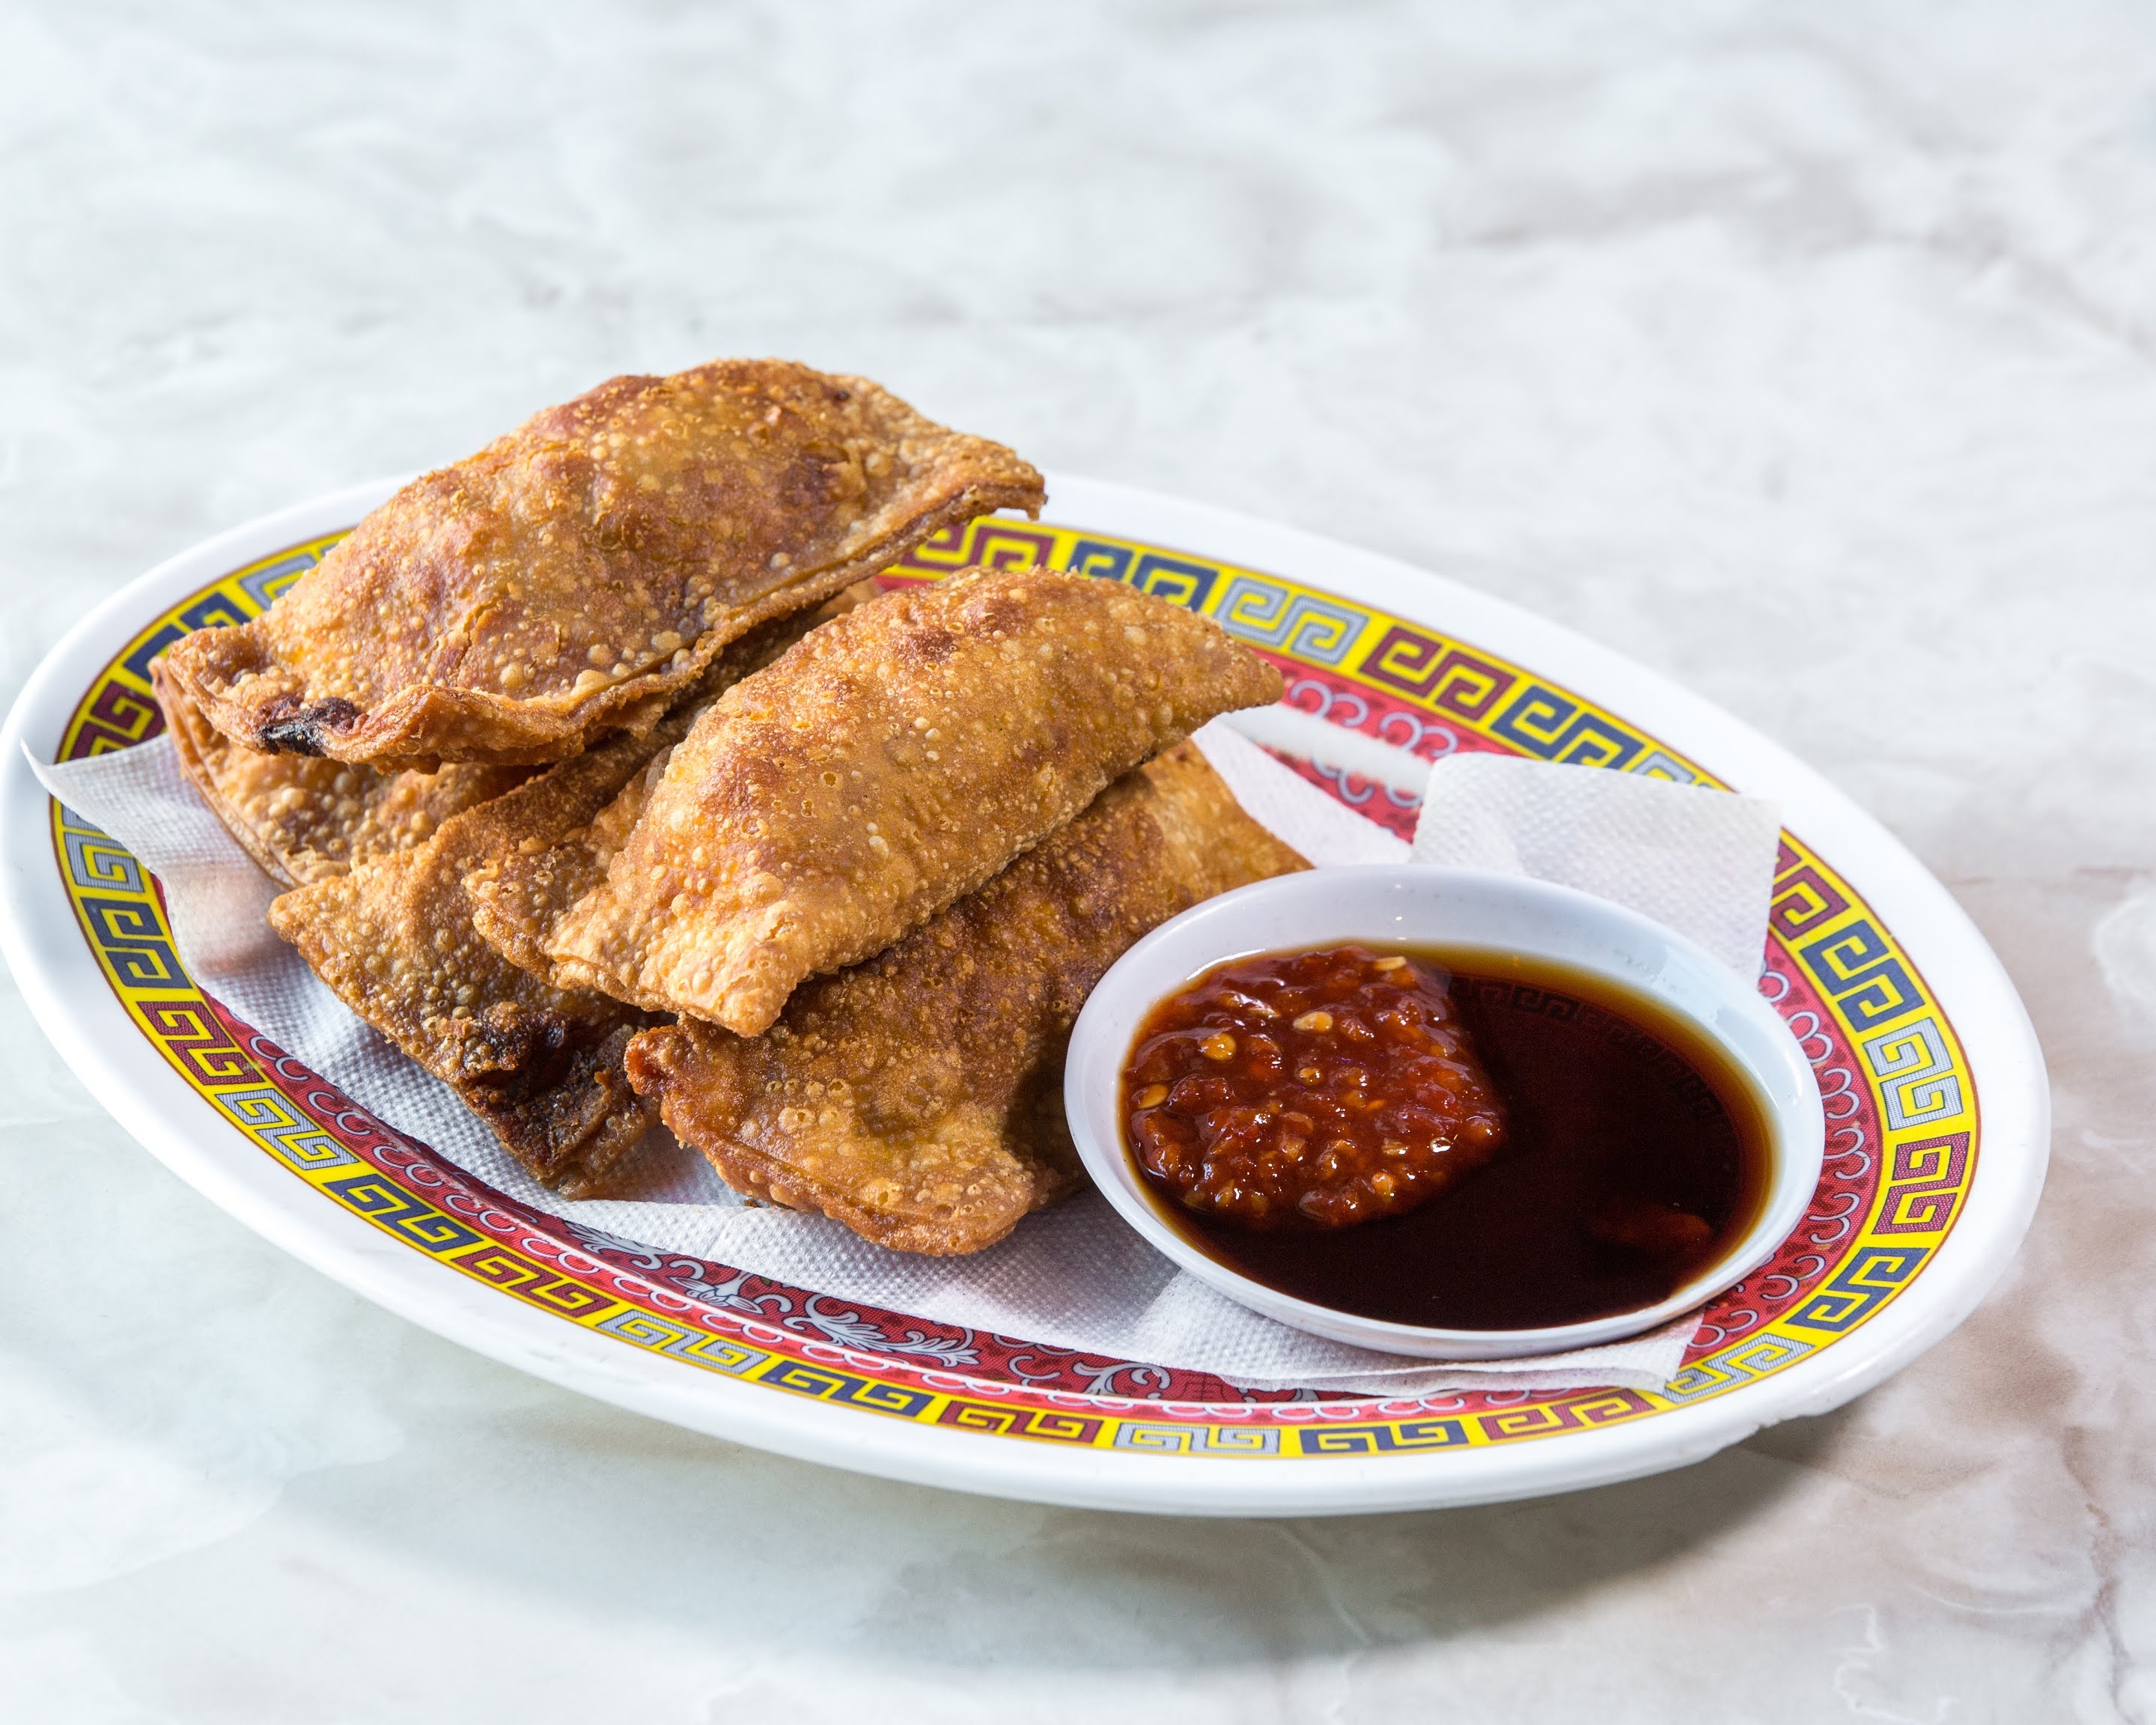 Fried dumplings on a decorative plate with dipping sauce